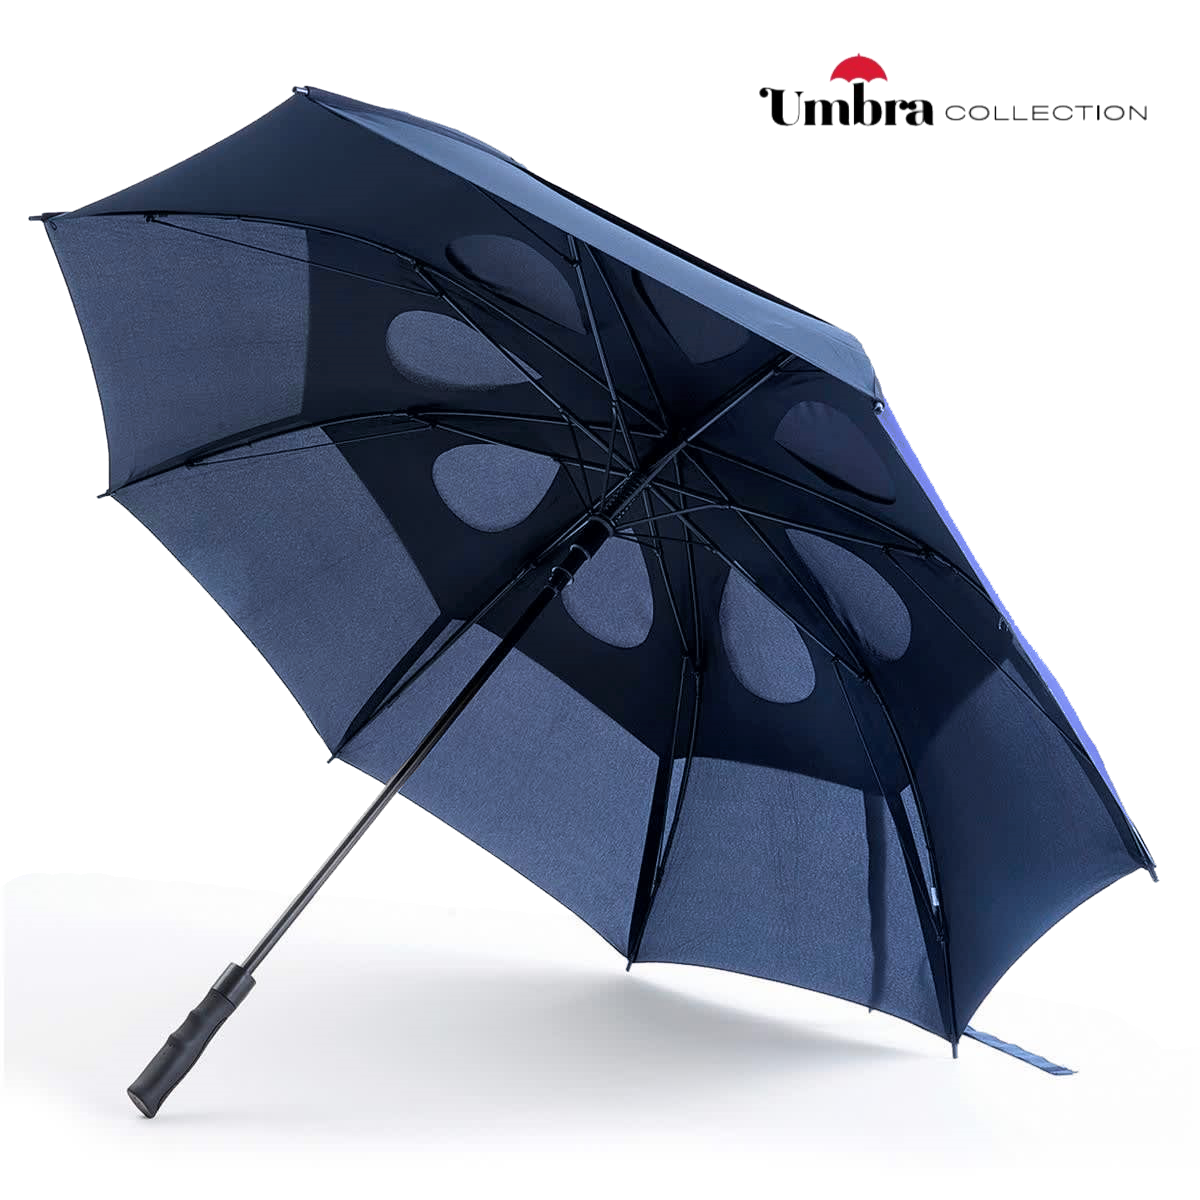 UMBRA_-ultimate-heavy-duty-umbrella-superior-fibreglass-ultimate_-frame-double-layer-wind-vent-system-navy-3